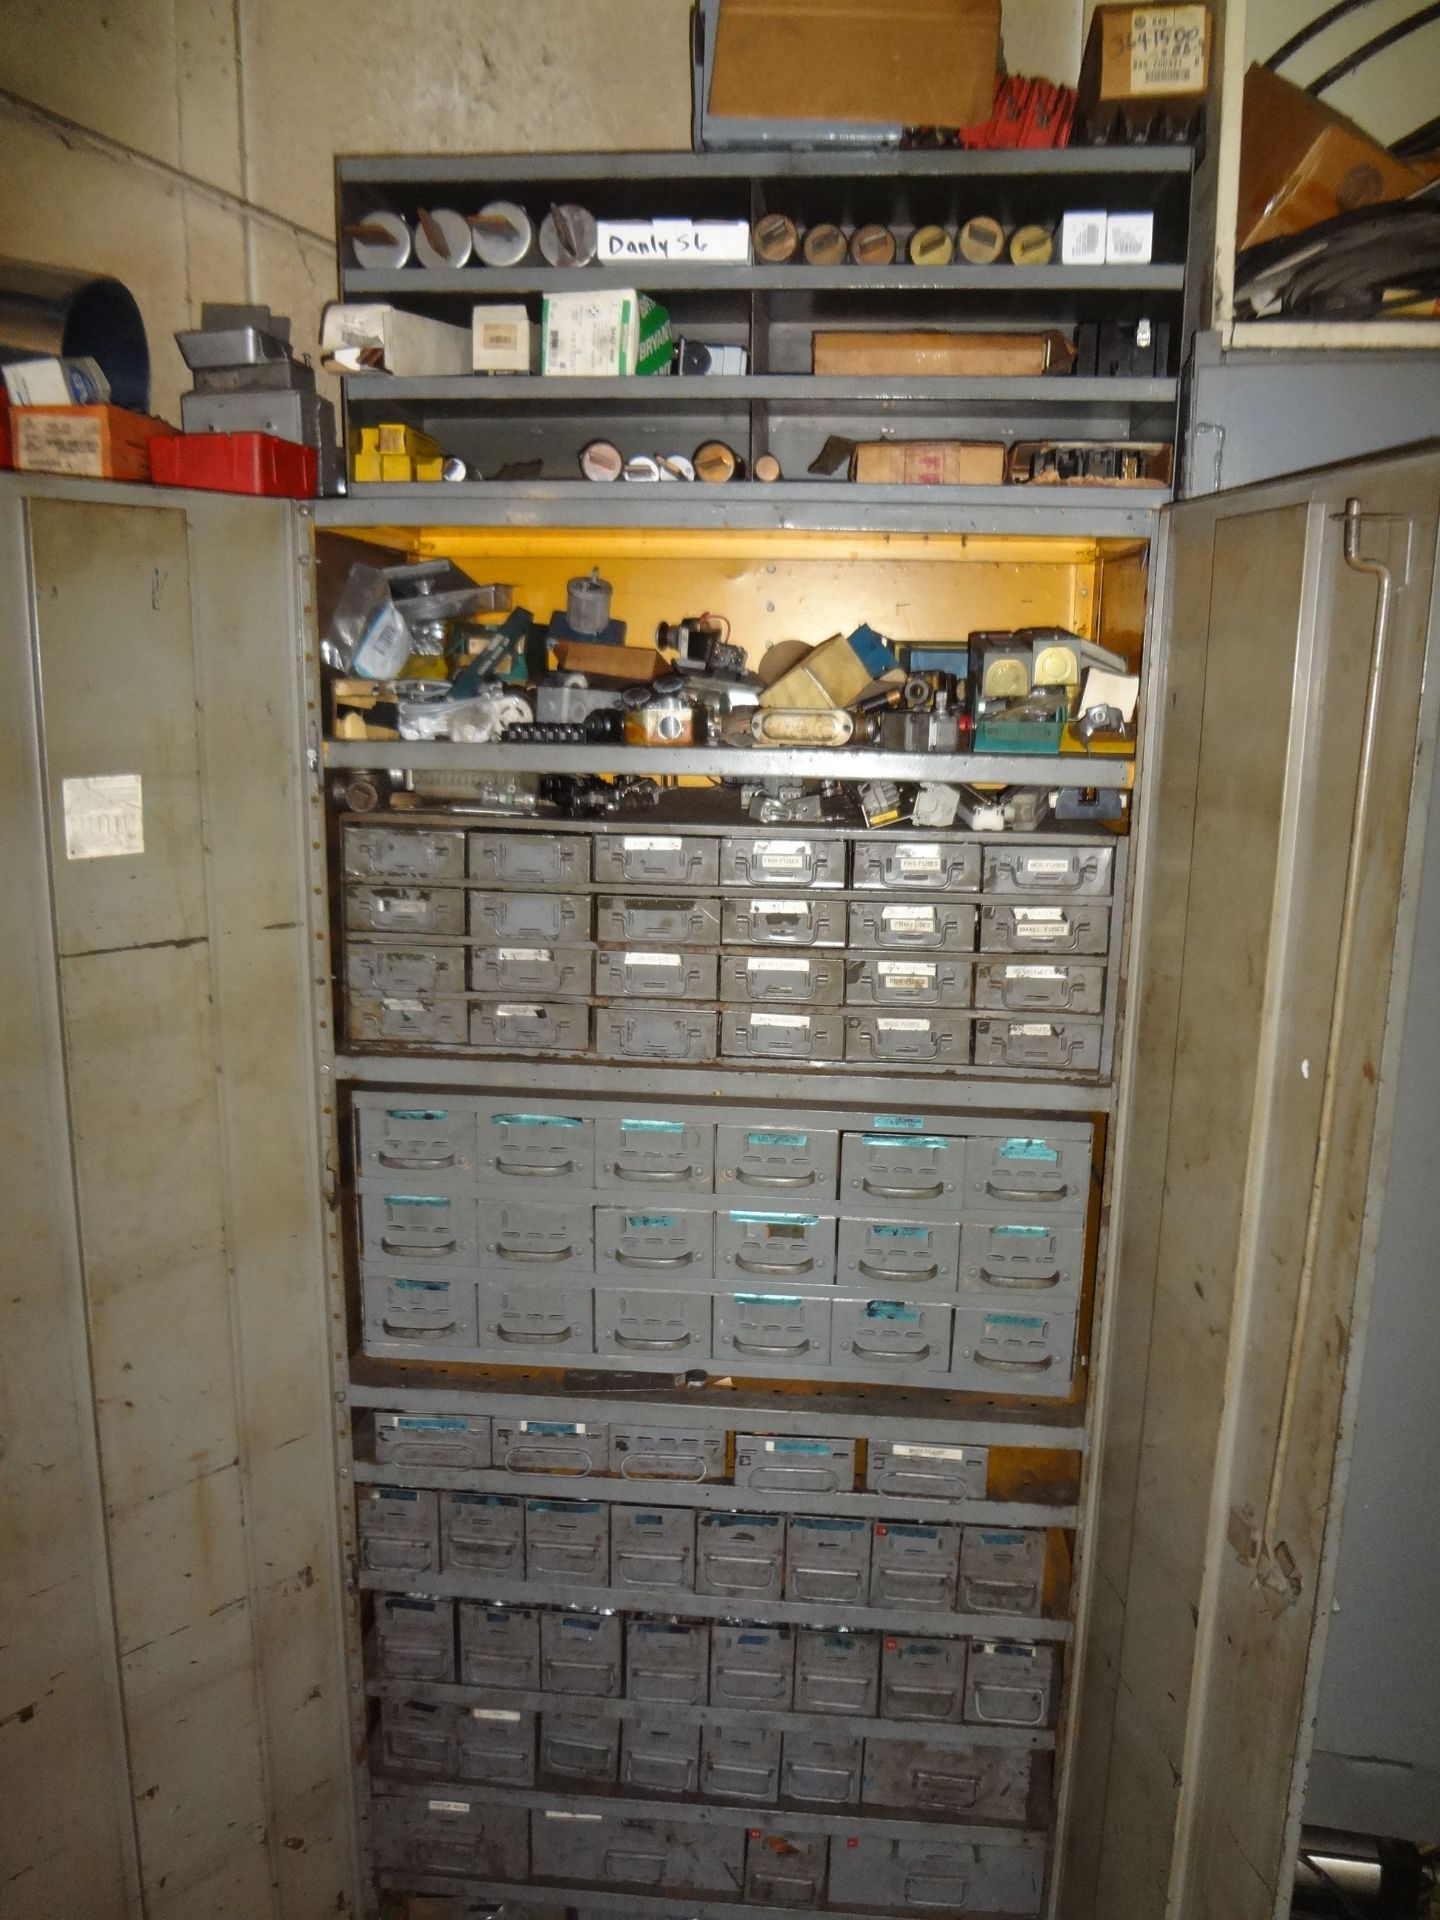 2-DOOR STEEL CABINET WITH CONTETNS INCLUDING LIFT TRUCK PARTS, MACHINE PARTS, FUSES, ELECTRICAL, - Image 6 of 8